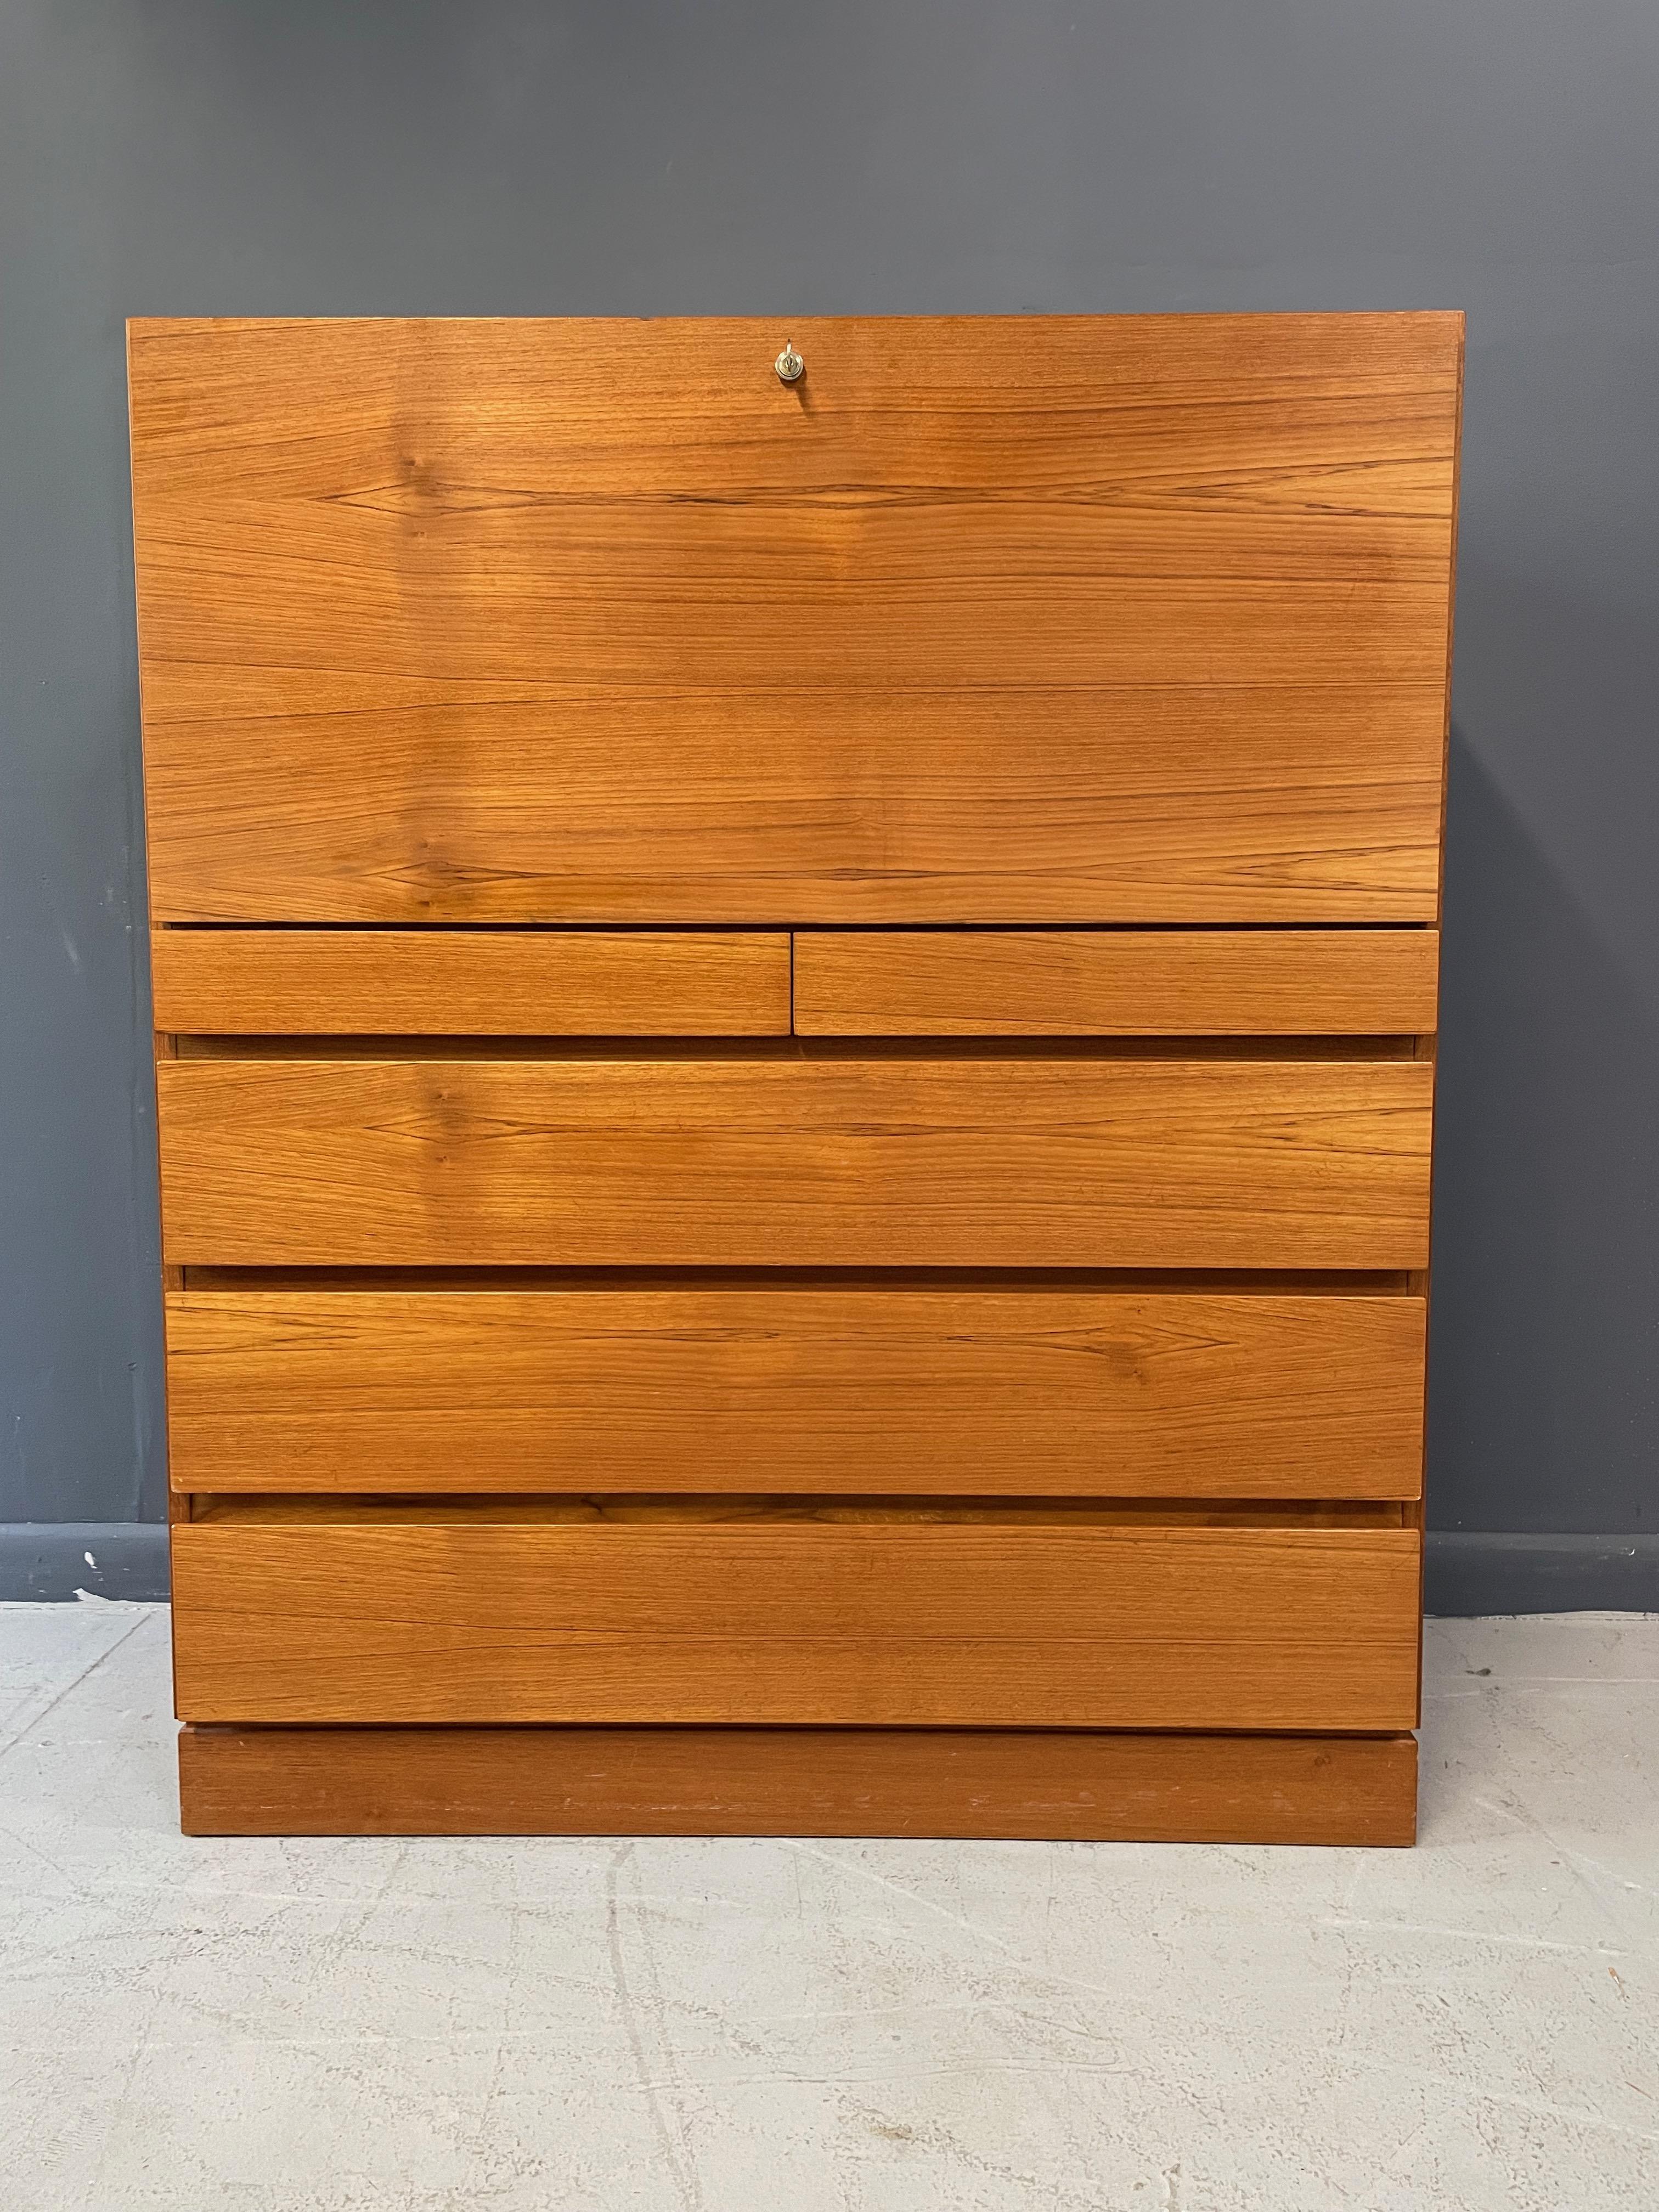 Danish Modern Arne Wahl Iversen Tall Teak Desk with Four Drawers Mid Century In Good Condition For Sale In Philadelphia, PA